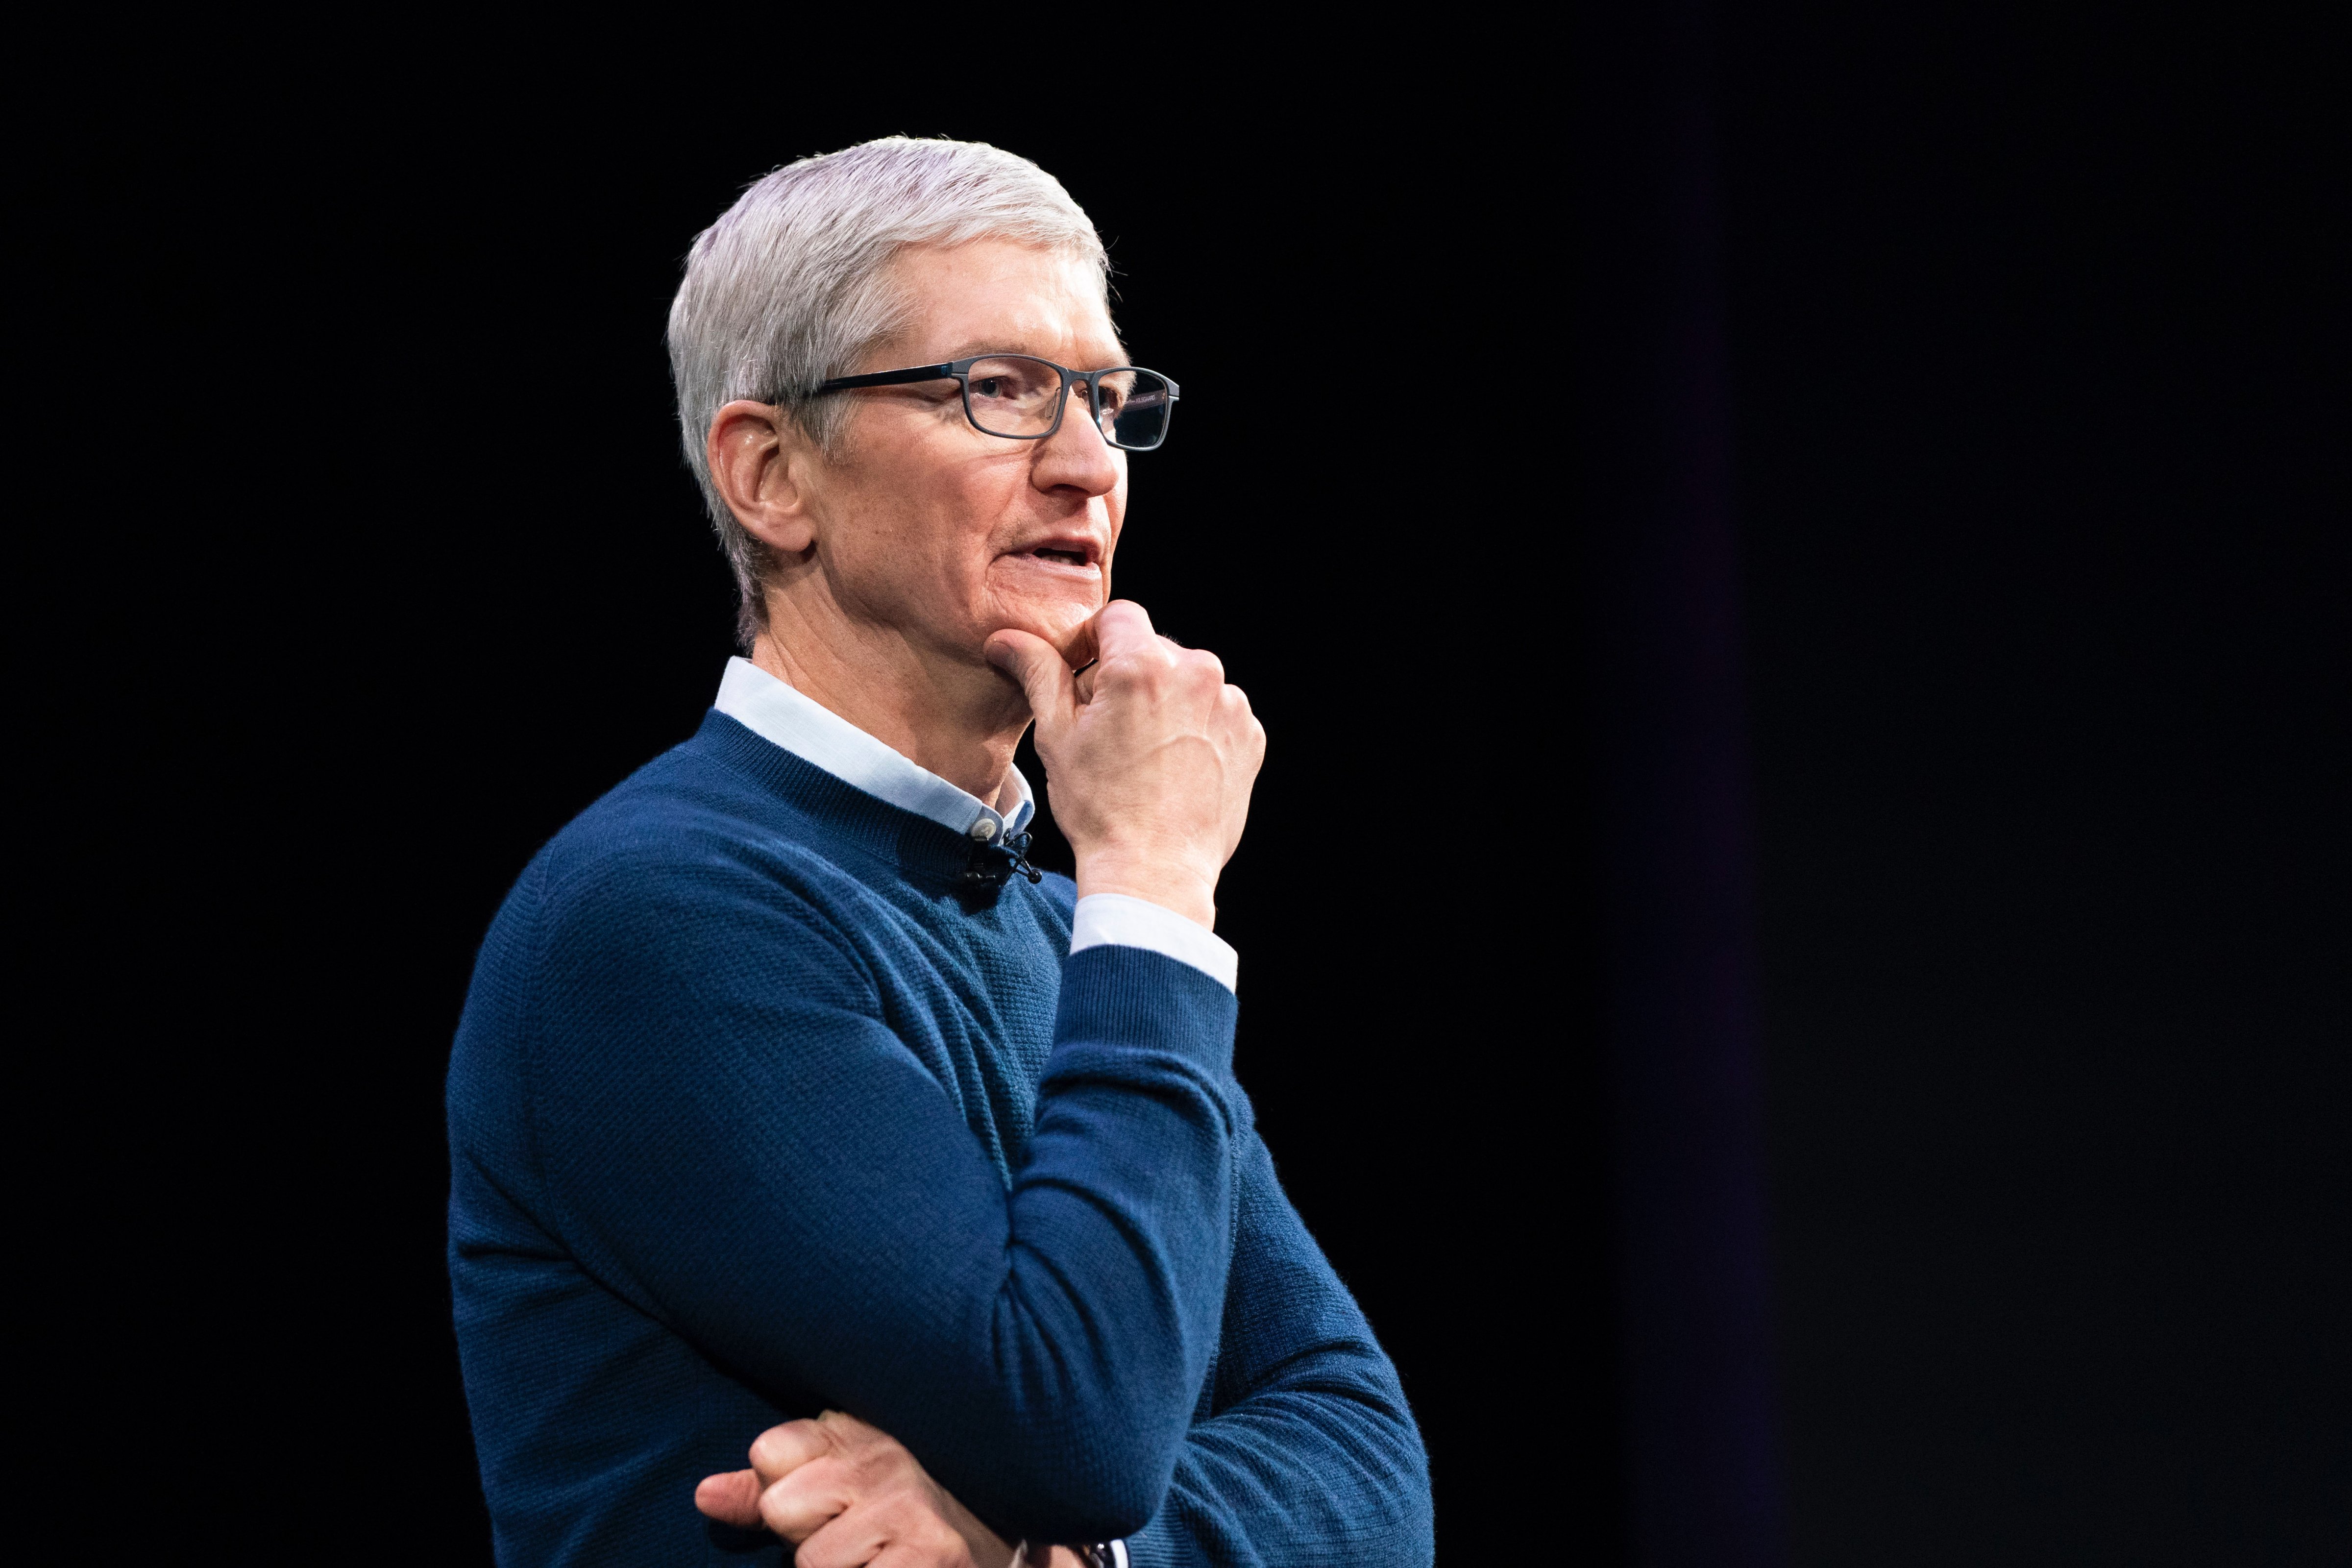 Apple CEO Tim Cook will join the TIME 100 Summit on April 23, 2019 in New York City to discuss leadership and innovation. (Courtesy of Apple)